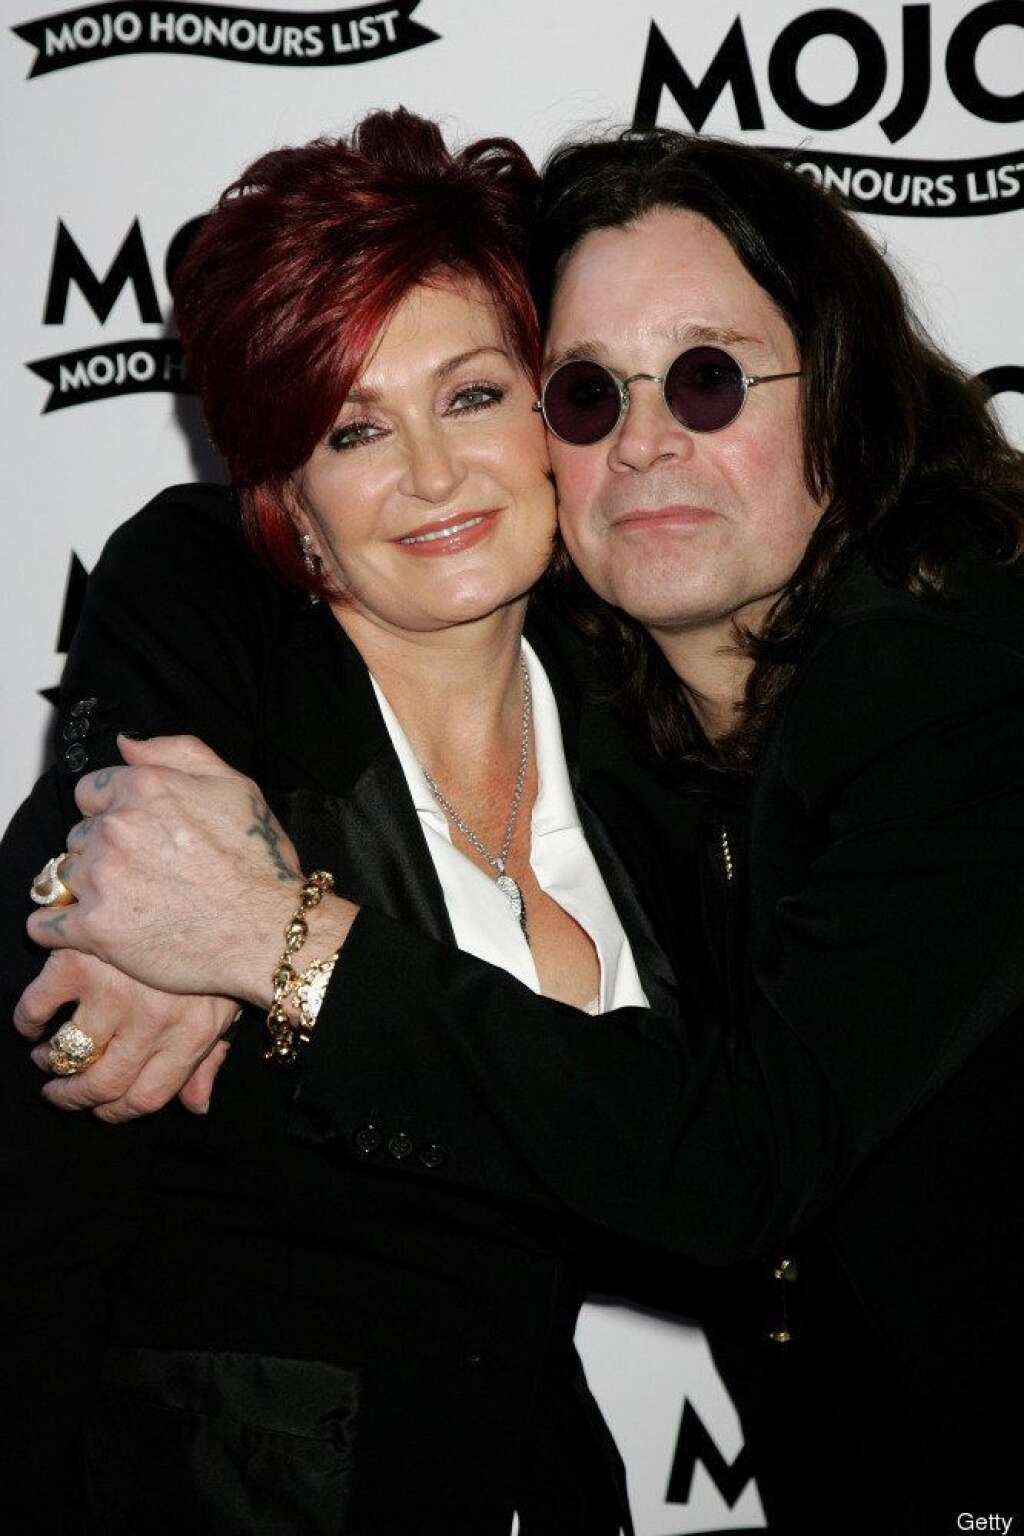 Ozzy and Sharon Osbourne - According to the IRS, Ozzy Osbourne and his wife Sharon owed $1.7 million in taxes from 2008 and 2009.